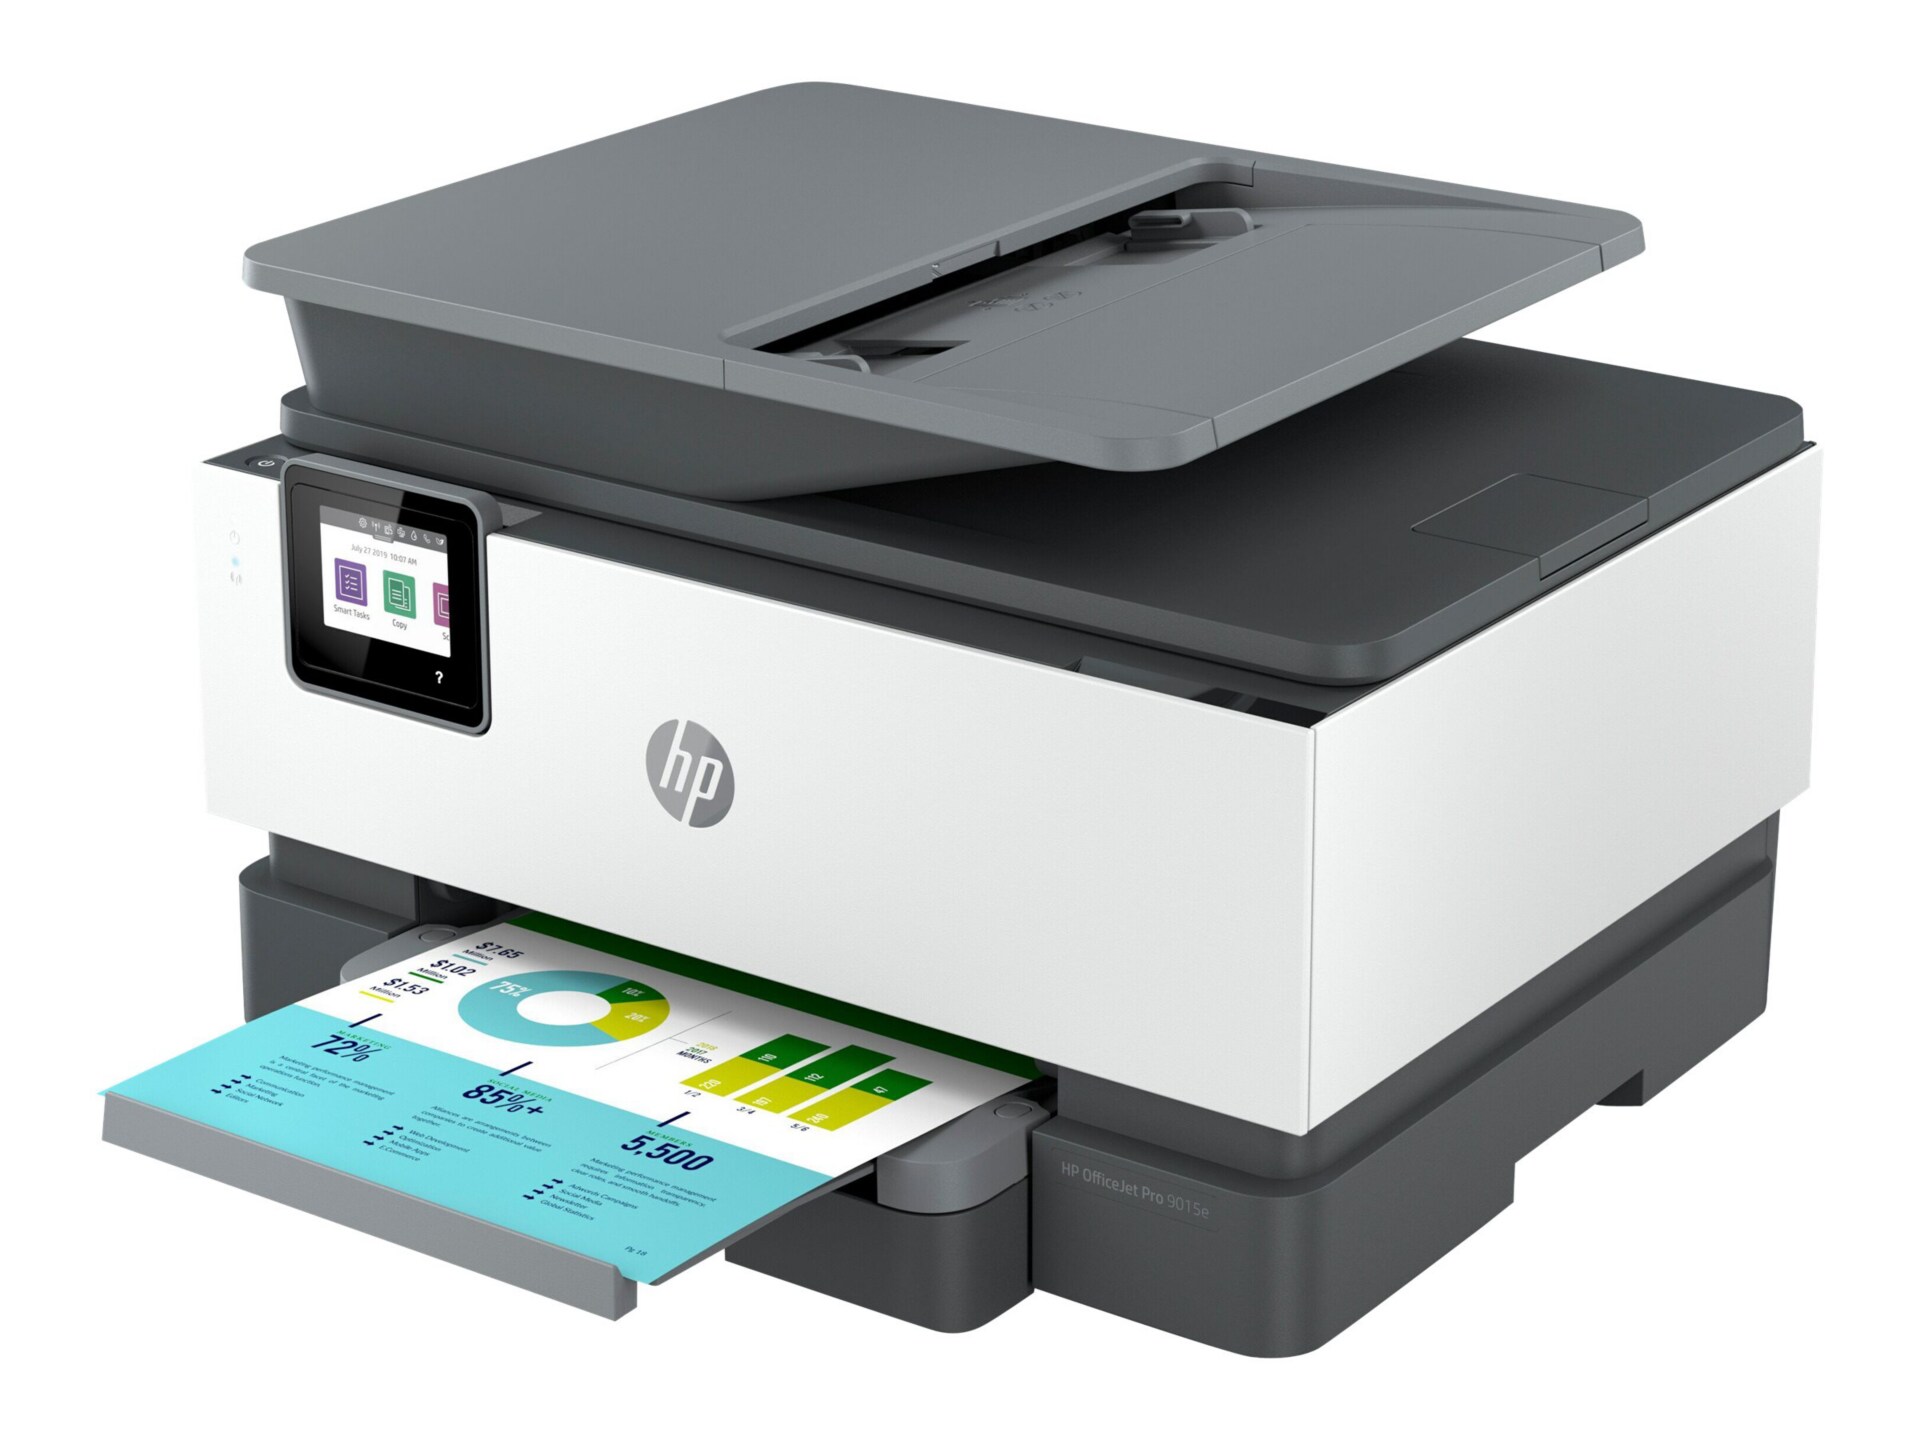 HP Officejet Pro All-in-One multifunction printer - color - HP Instant Ink eligible - 1G5L3A#B1H - All-in-One CDW.com